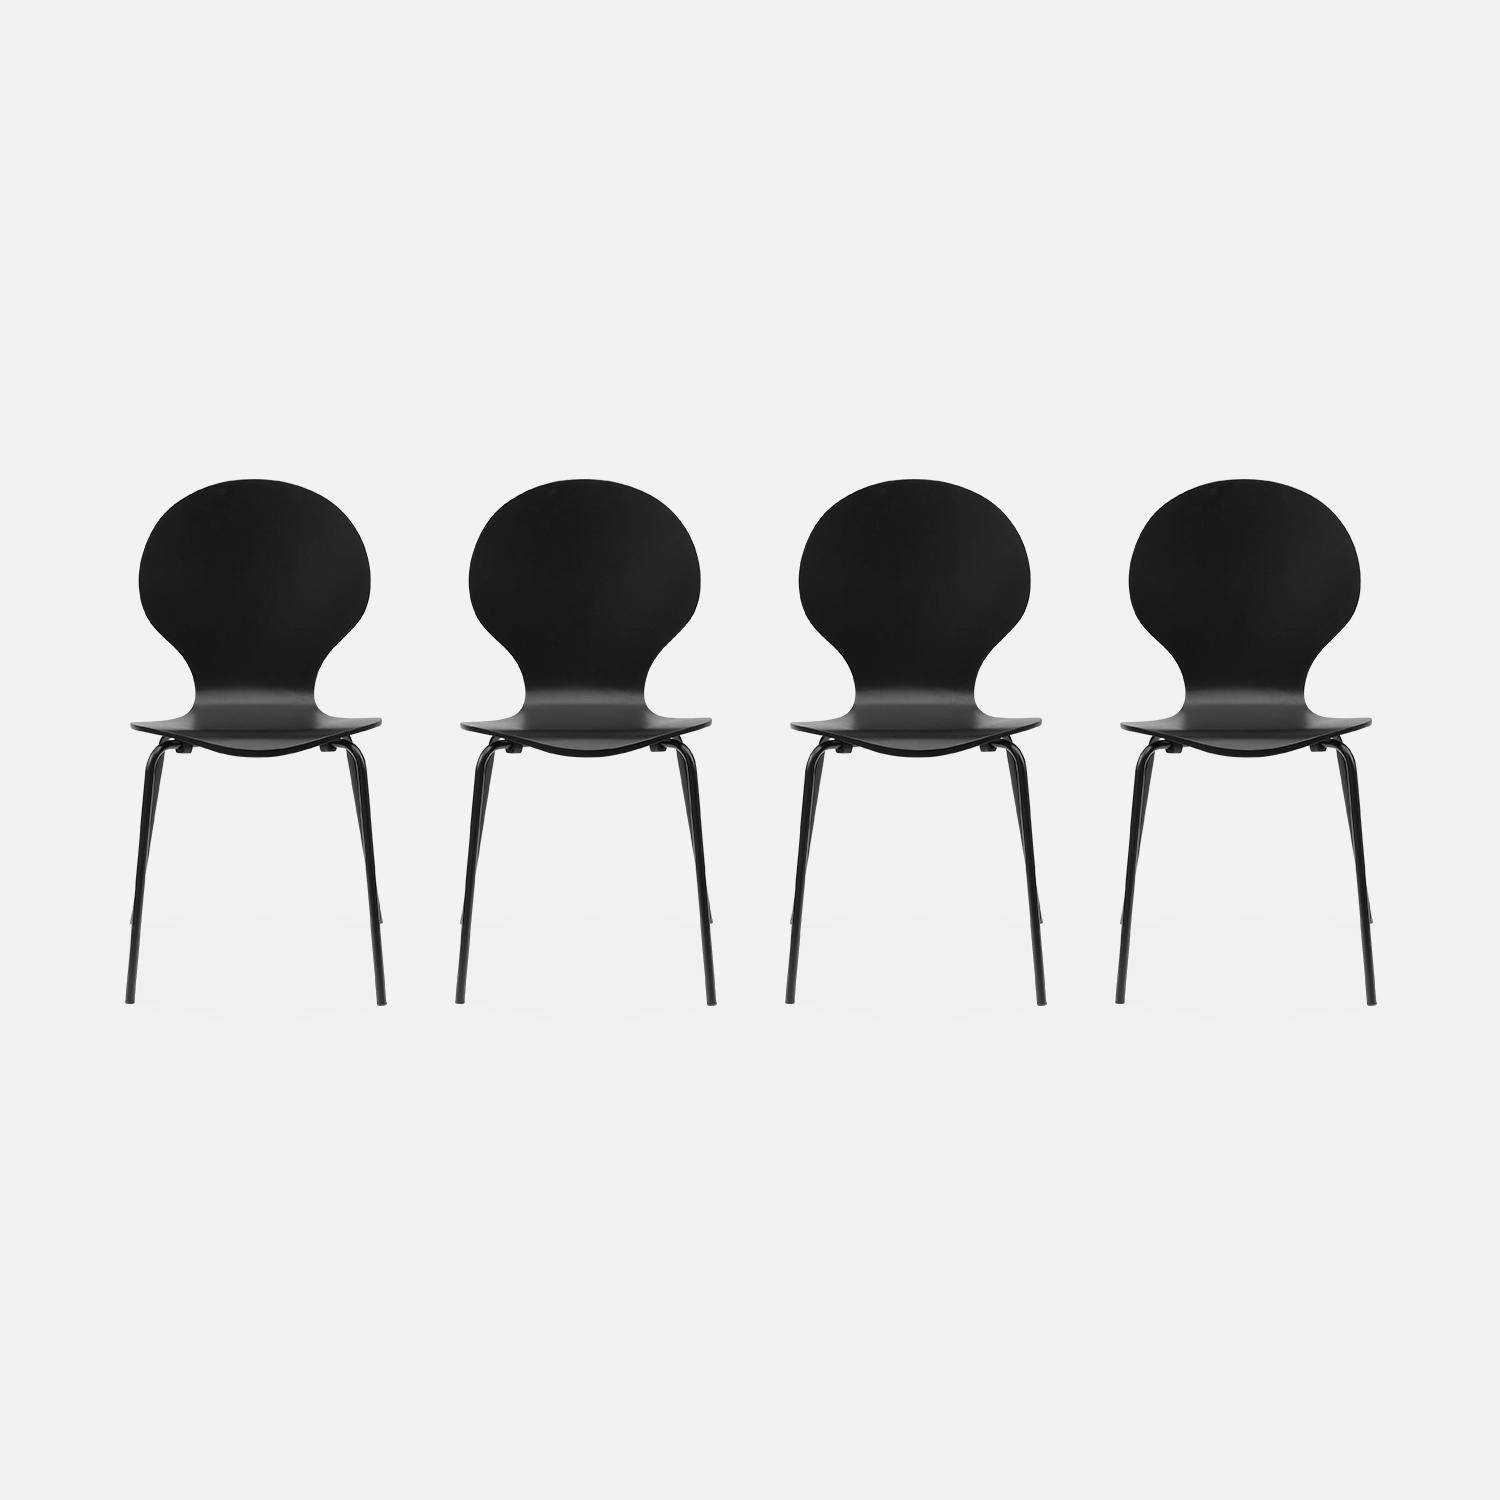 Set of 4 stackable Retro Chairs, Wood and Plywood, black,  L43 x W48 x H87cm Photo3